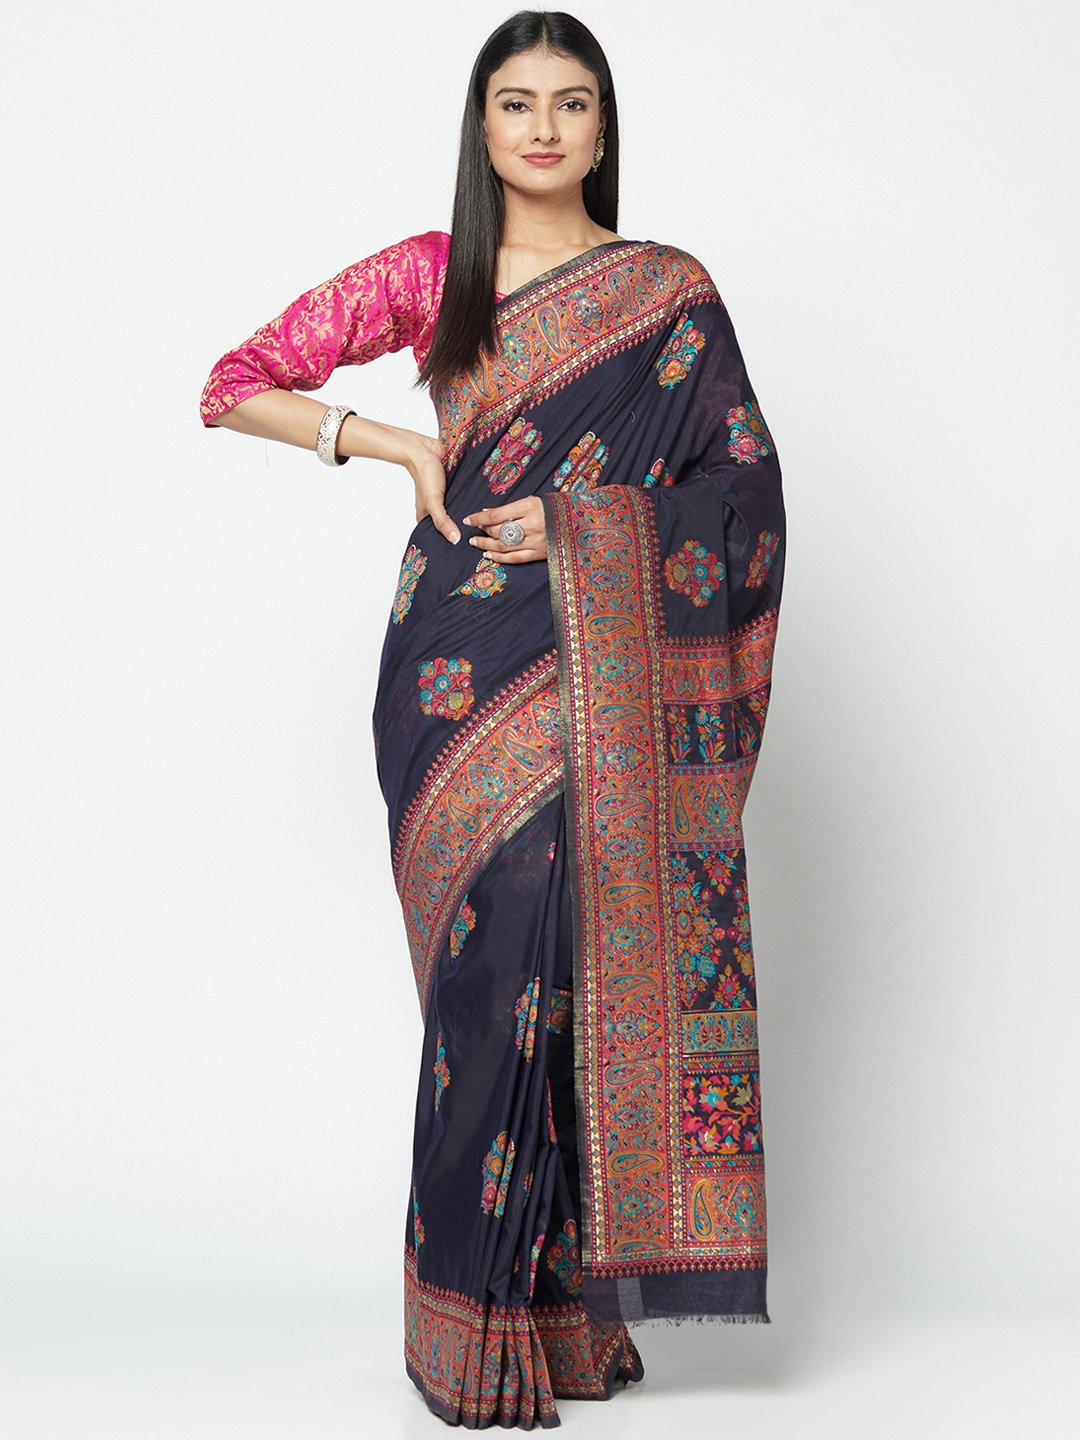 Shop Black Handloom Saree For Party Wear which is Saree online at simaaya At